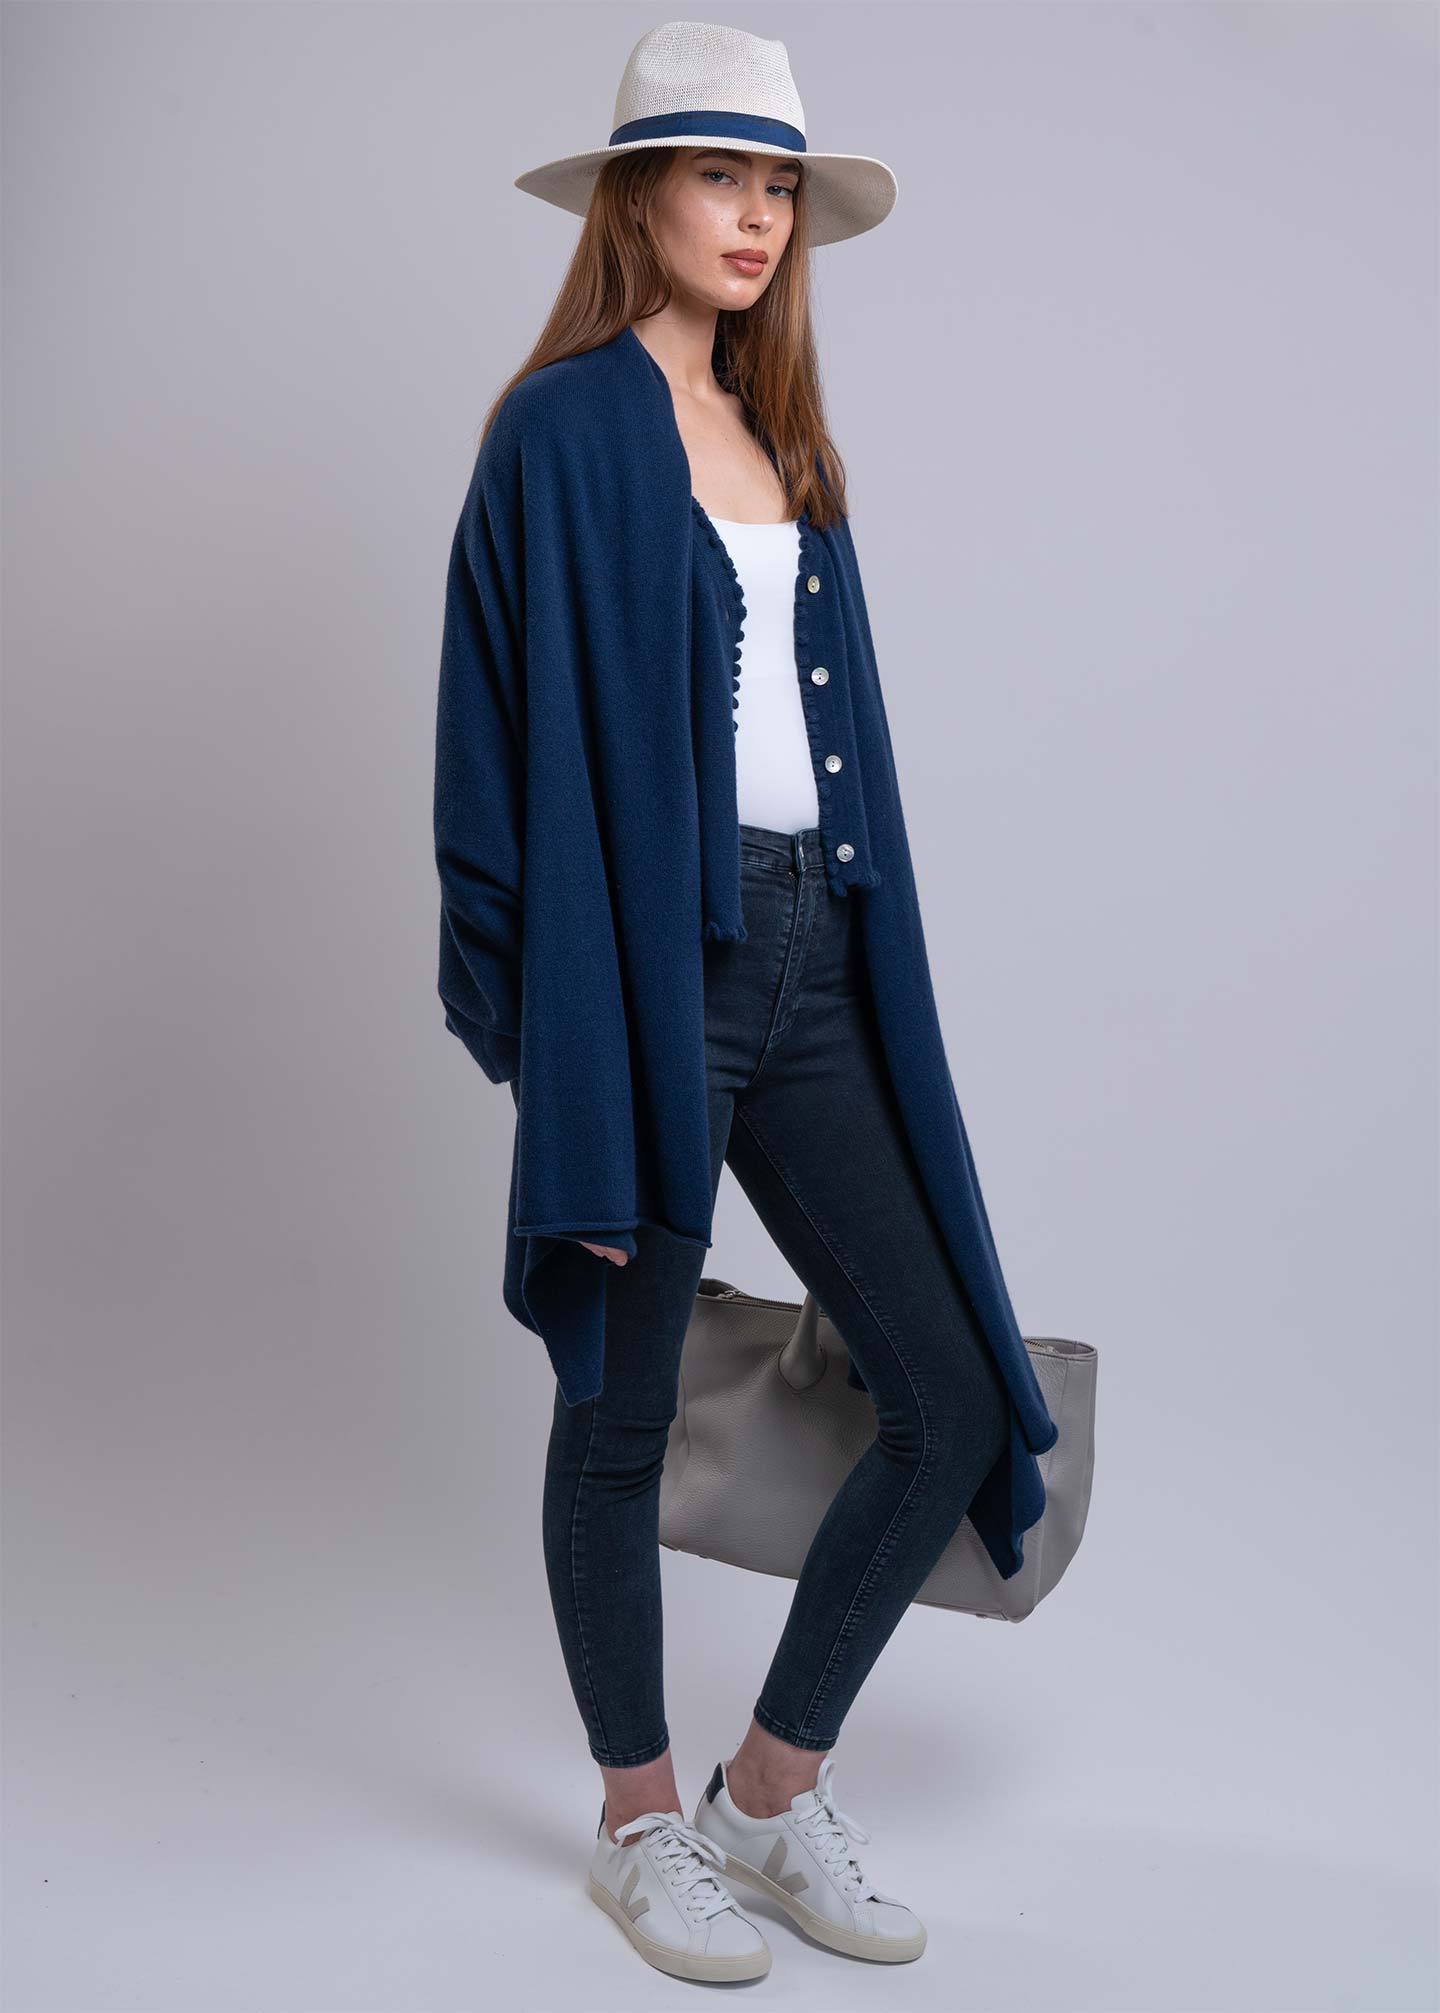 navy cashmere cardigan and cashmere travel wrap